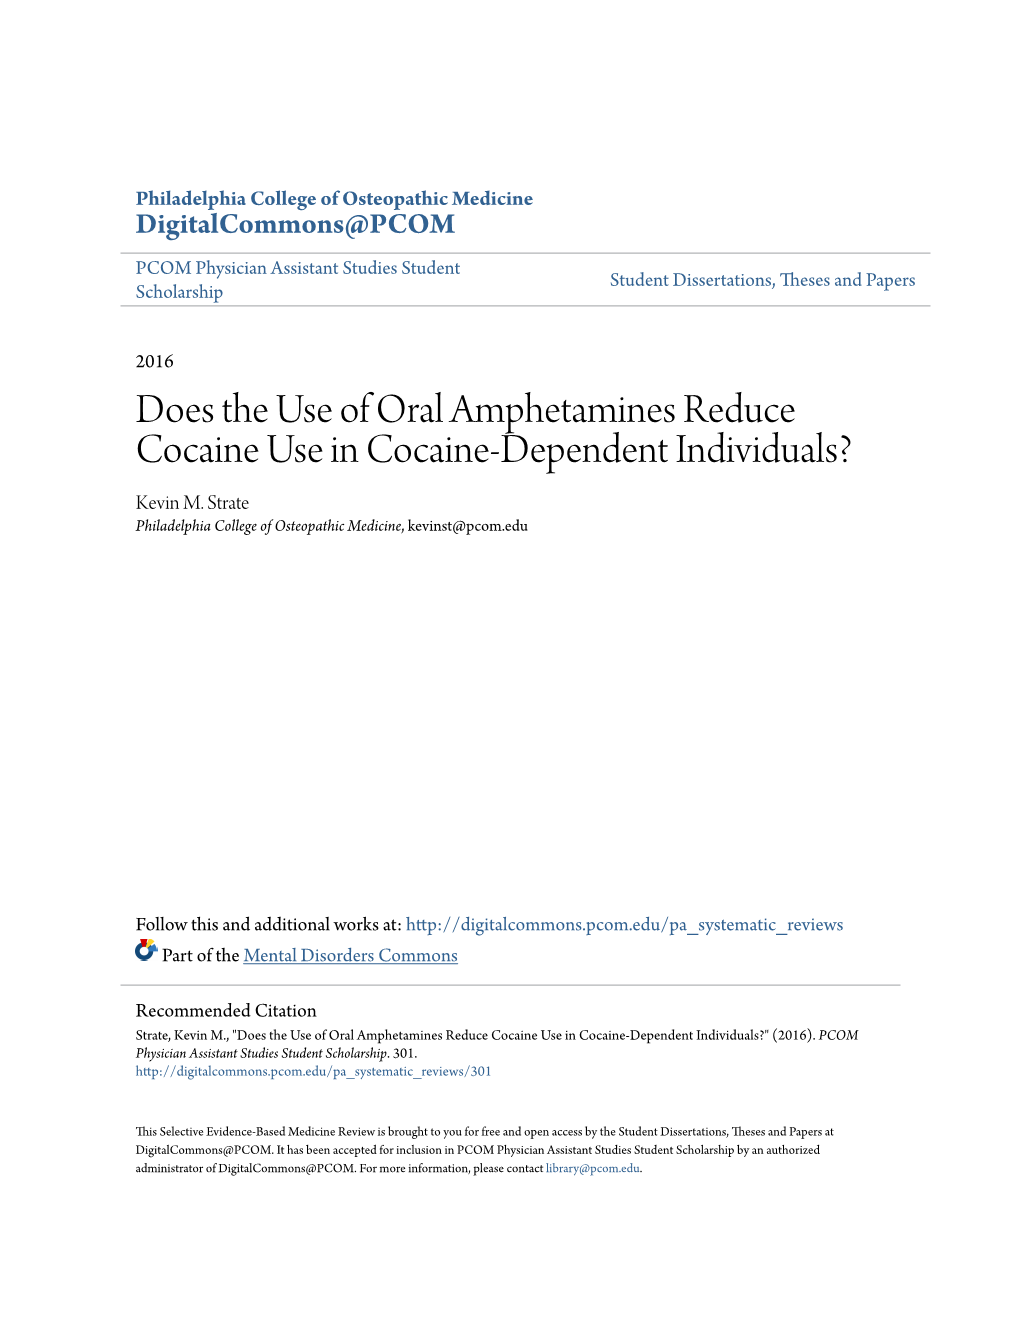 Does the Use of Oral Amphetamines Reduce Cocaine Use in Cocaine-Dependent Individuals? Kevin M